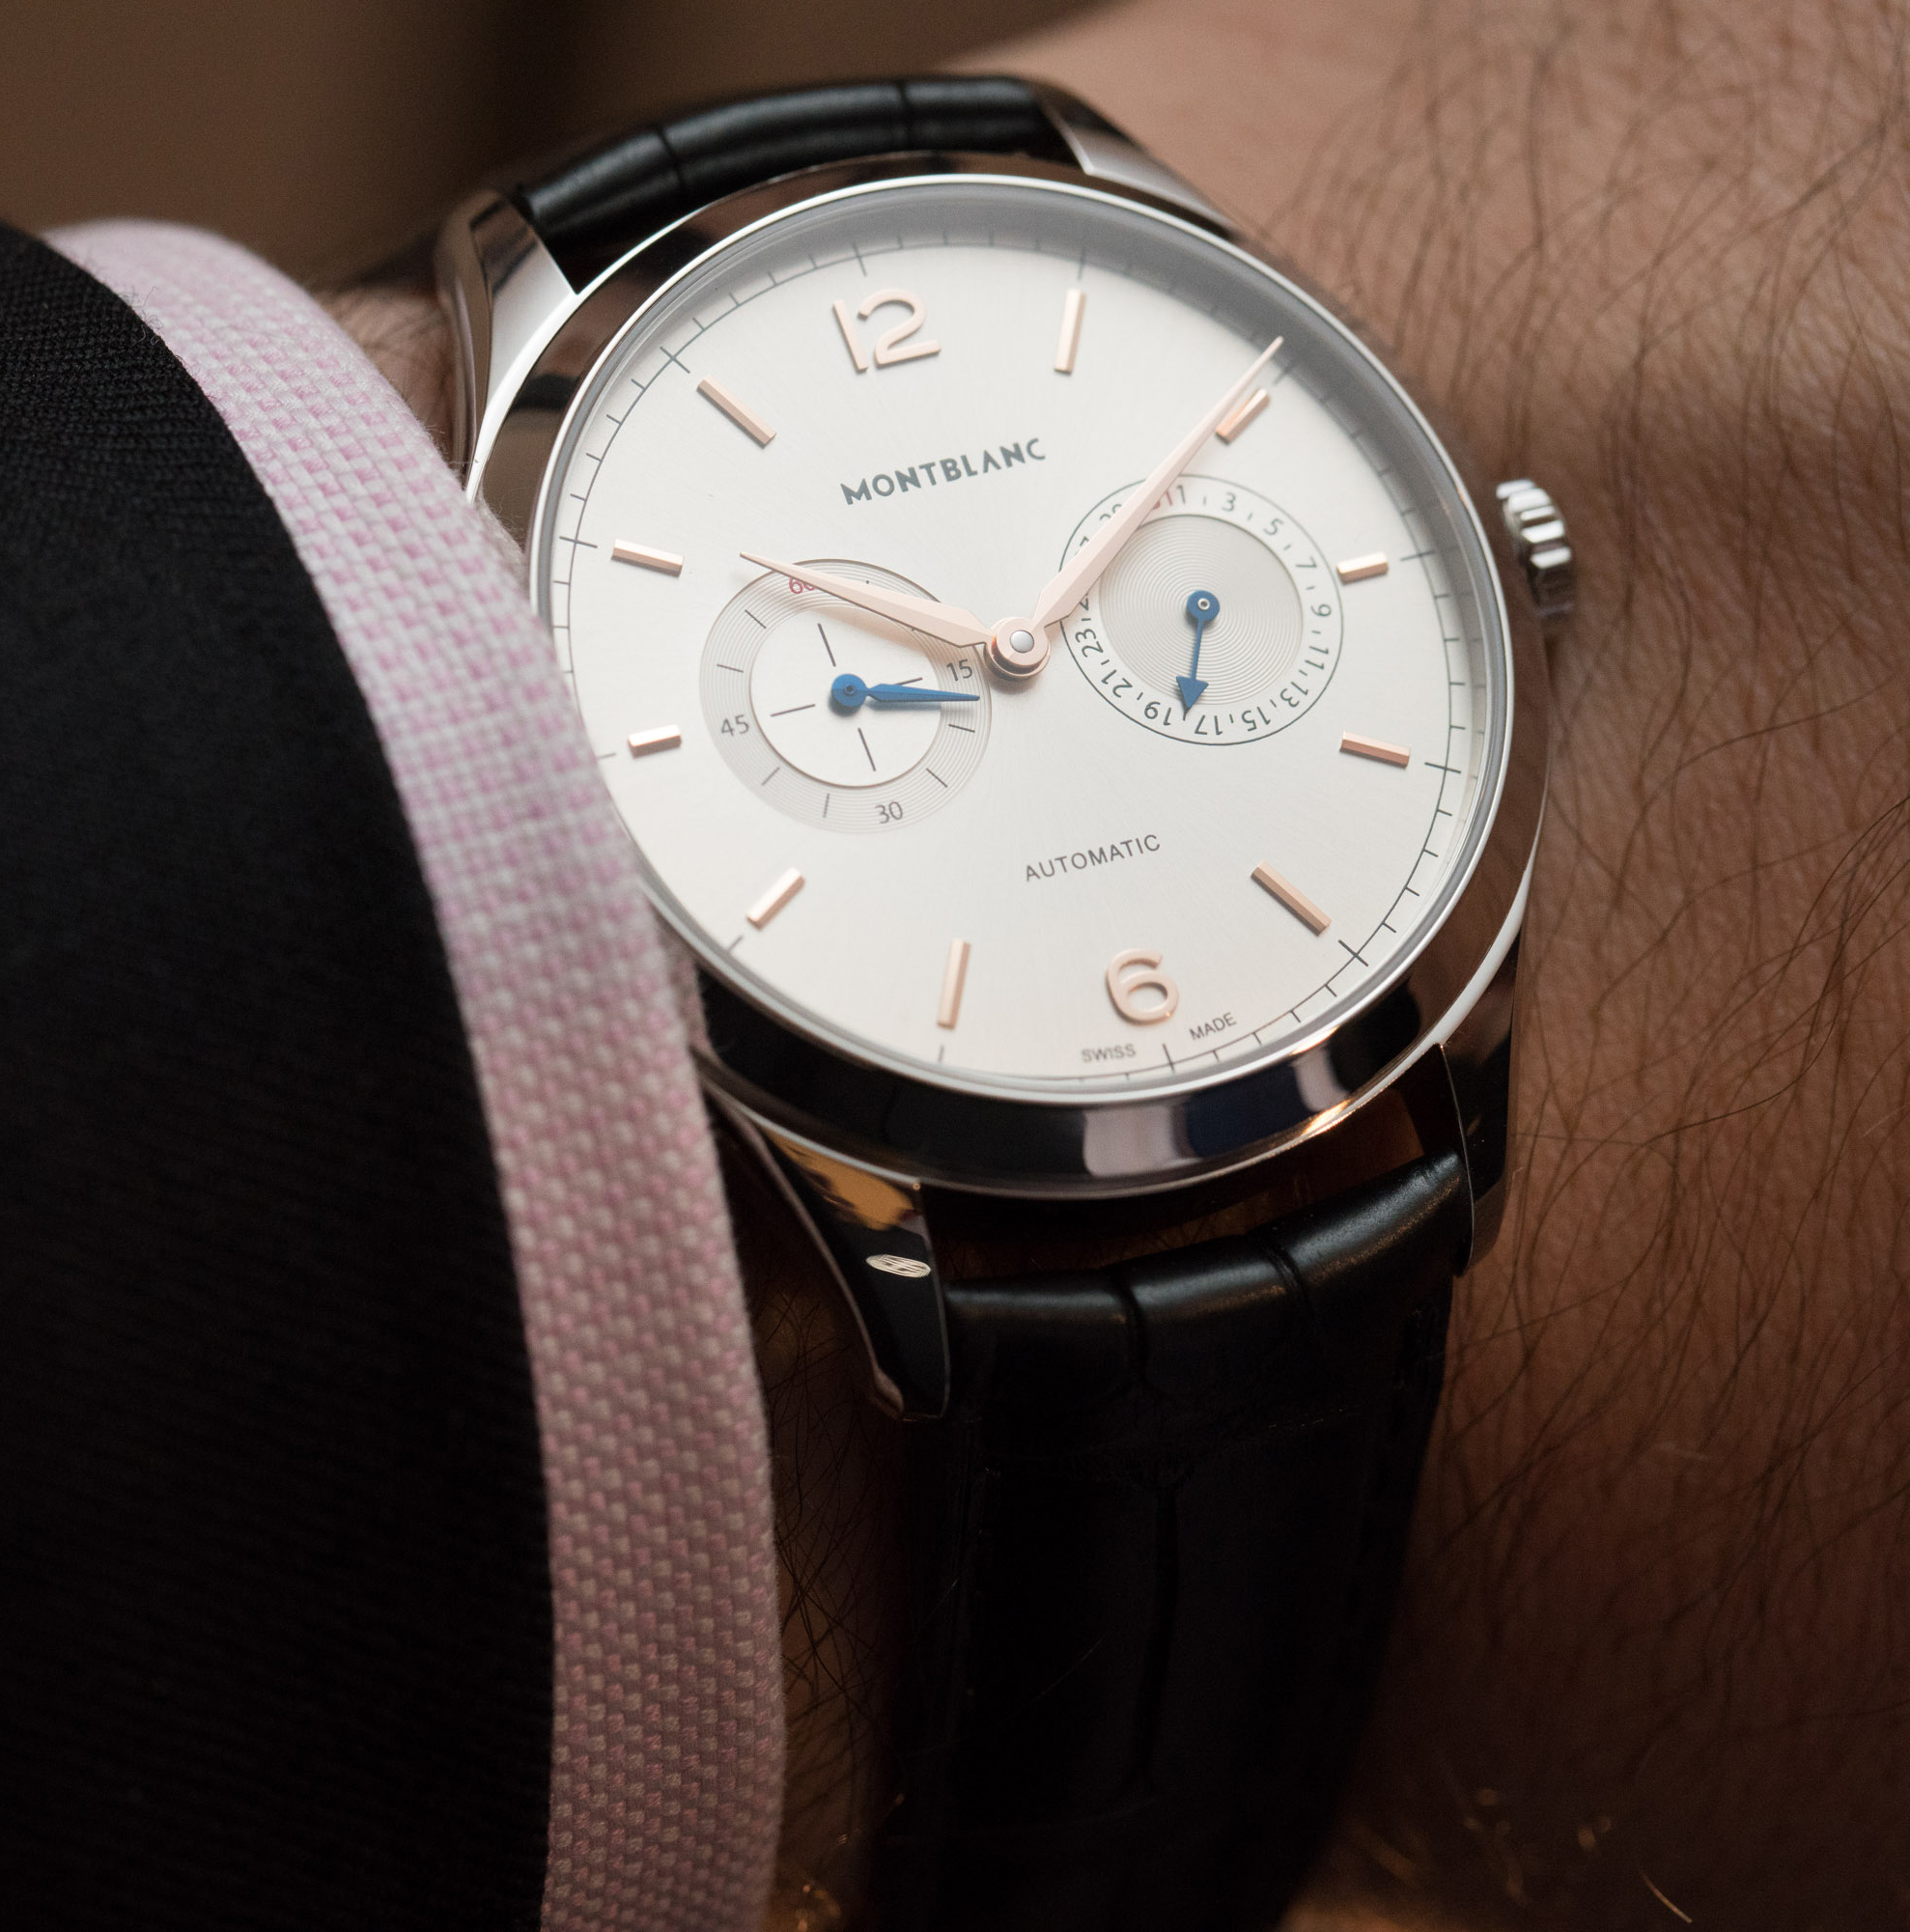 Montblanc Twincounter Date – Hands-on Review